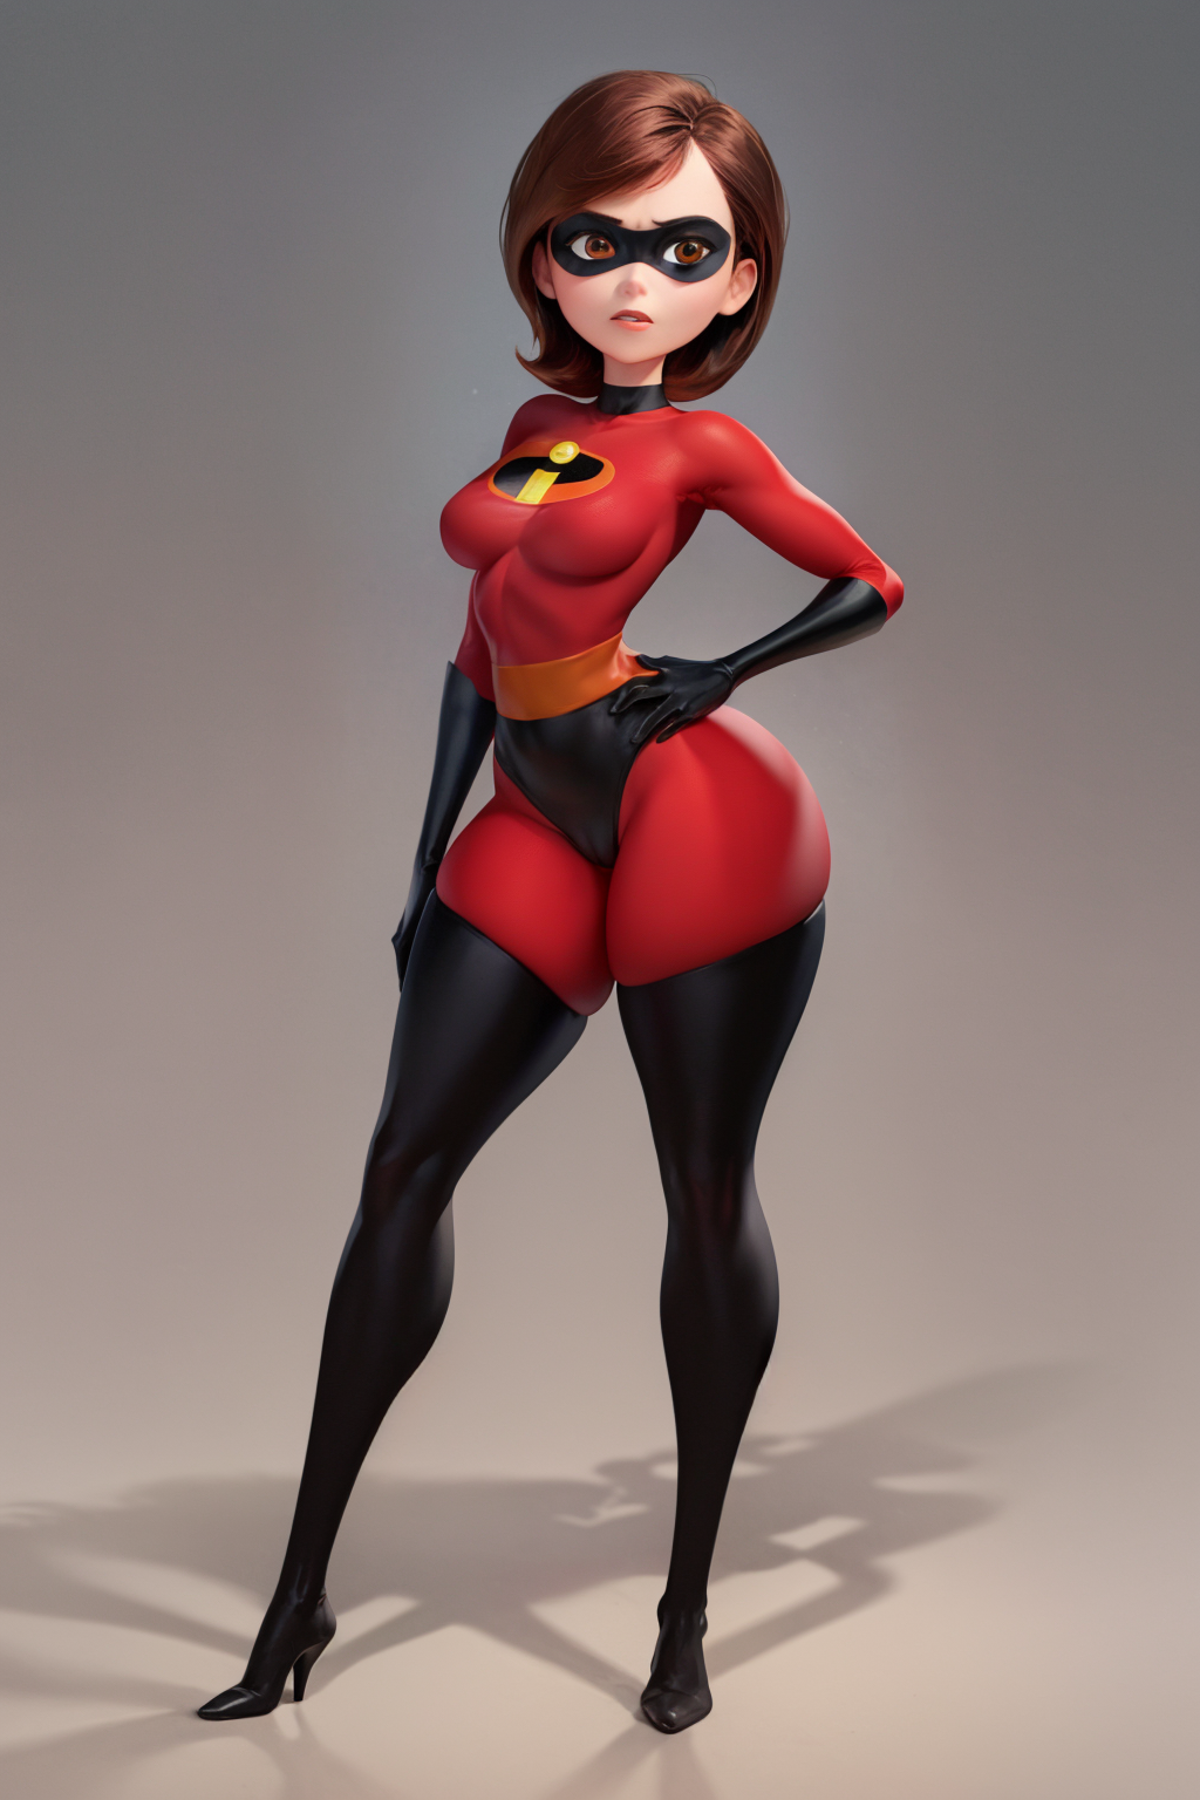 Helen Parr - The Incredibles - Character LORA image by Konan